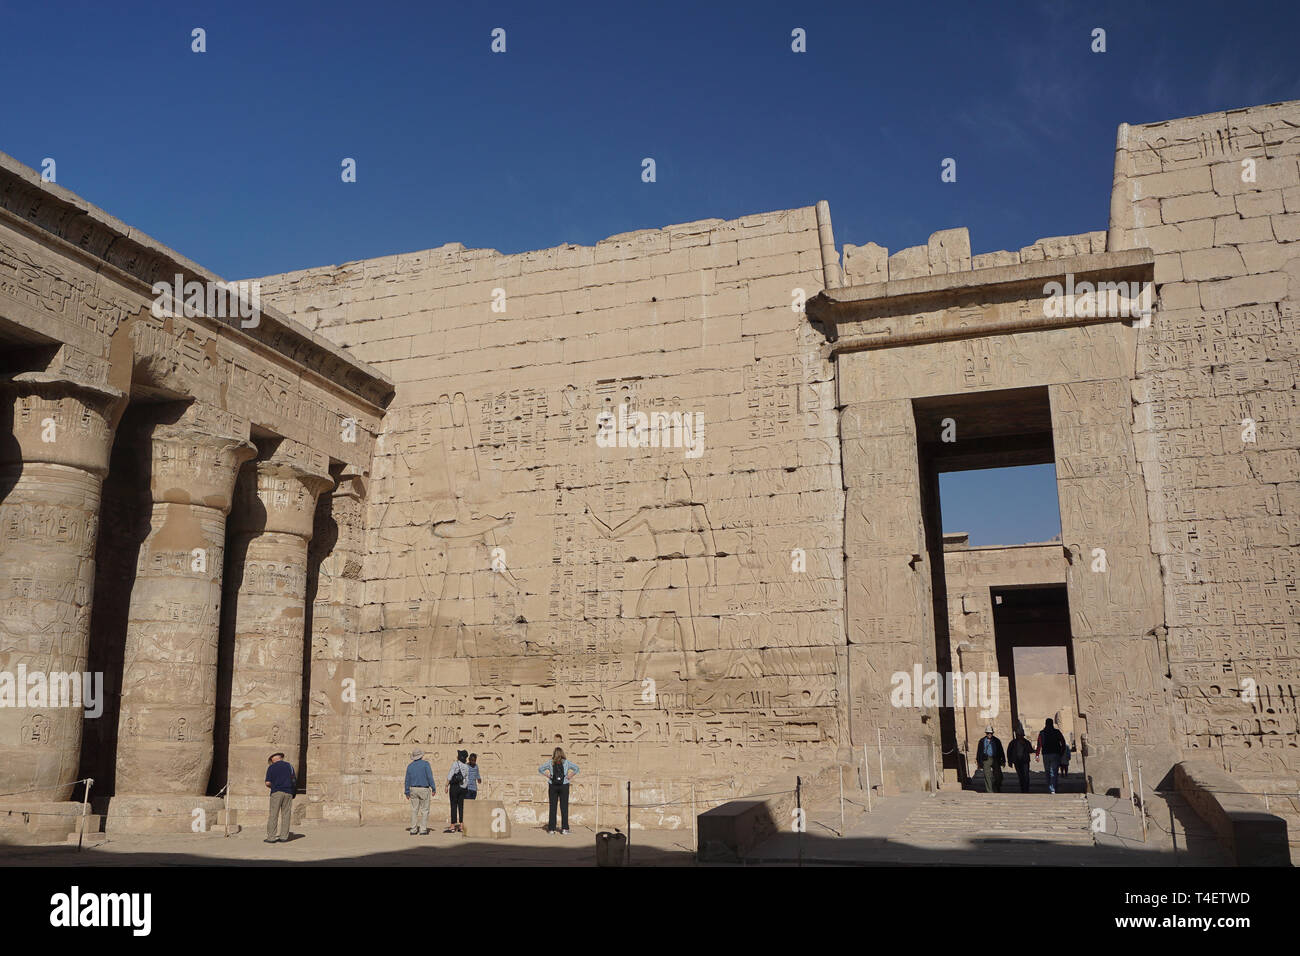 Luxor, Egypt: Tourists visit Medinet Habu, the mortuary temple of Ramesses III, an important New Kingdom structure on the West Bank of the Nile River. Stock Photo